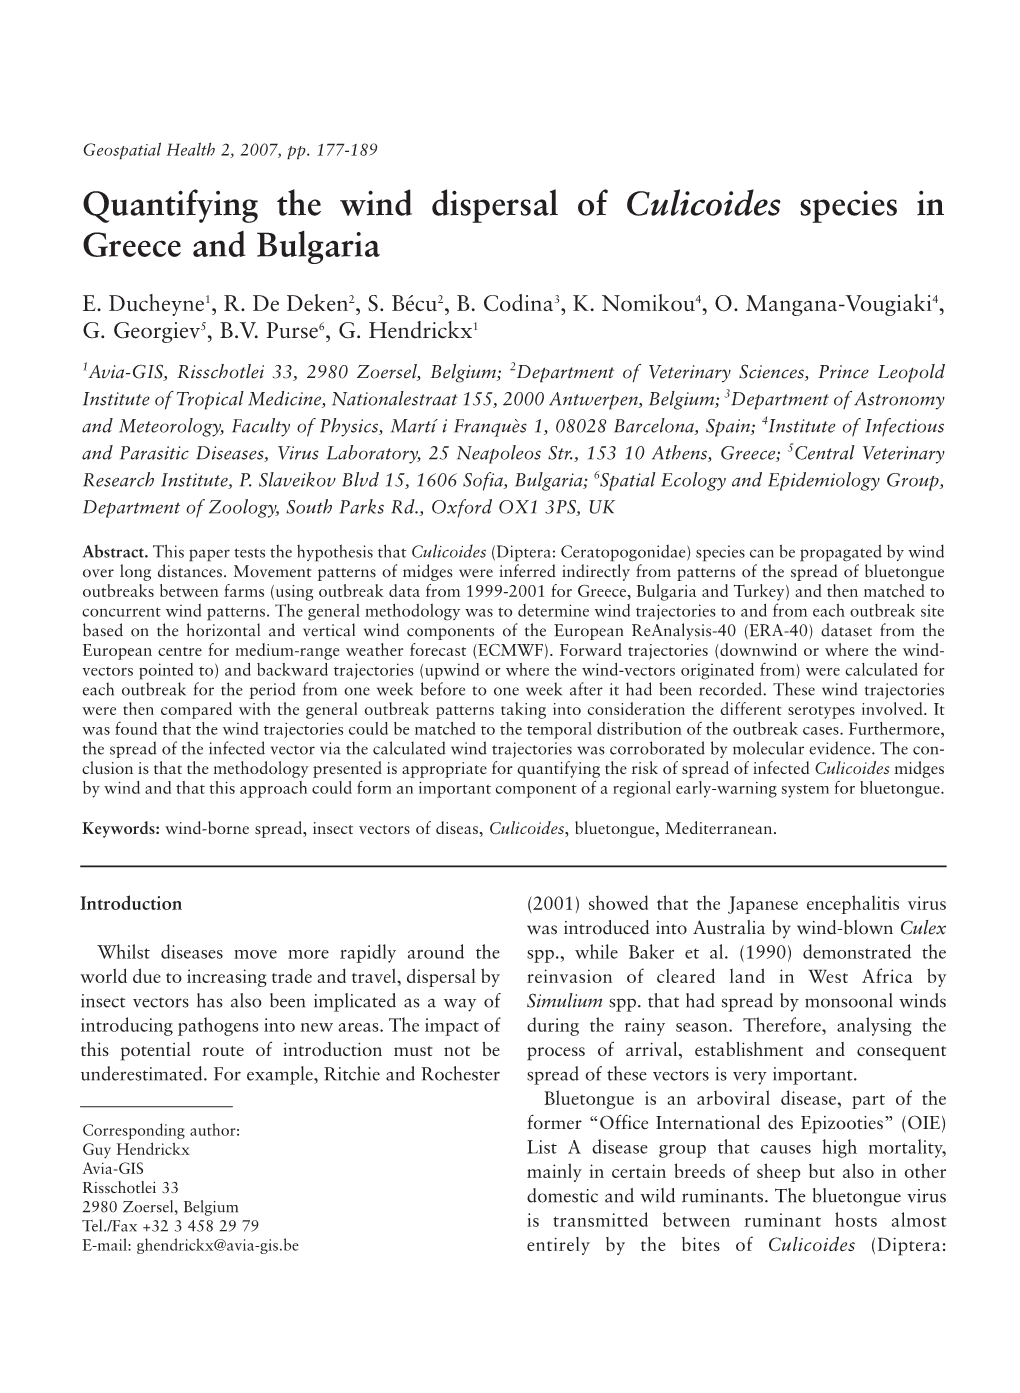 Quantifying the Wind Dispersal of Culicoides Species in Greece and Bulgaria